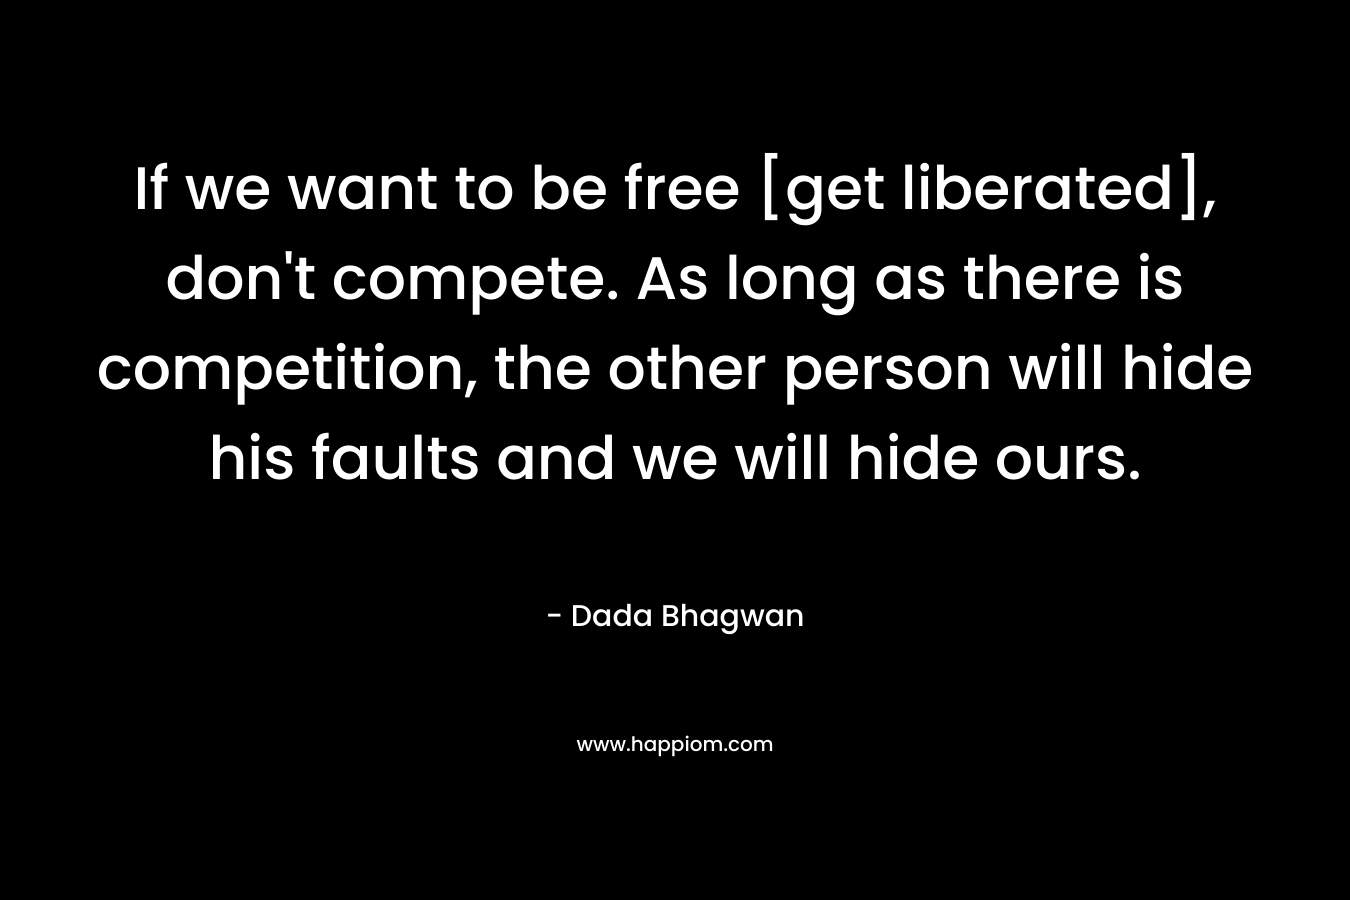 If we want to be free [get liberated], don't compete. As long as there is competition, the other person will hide his faults and we will hide ours.